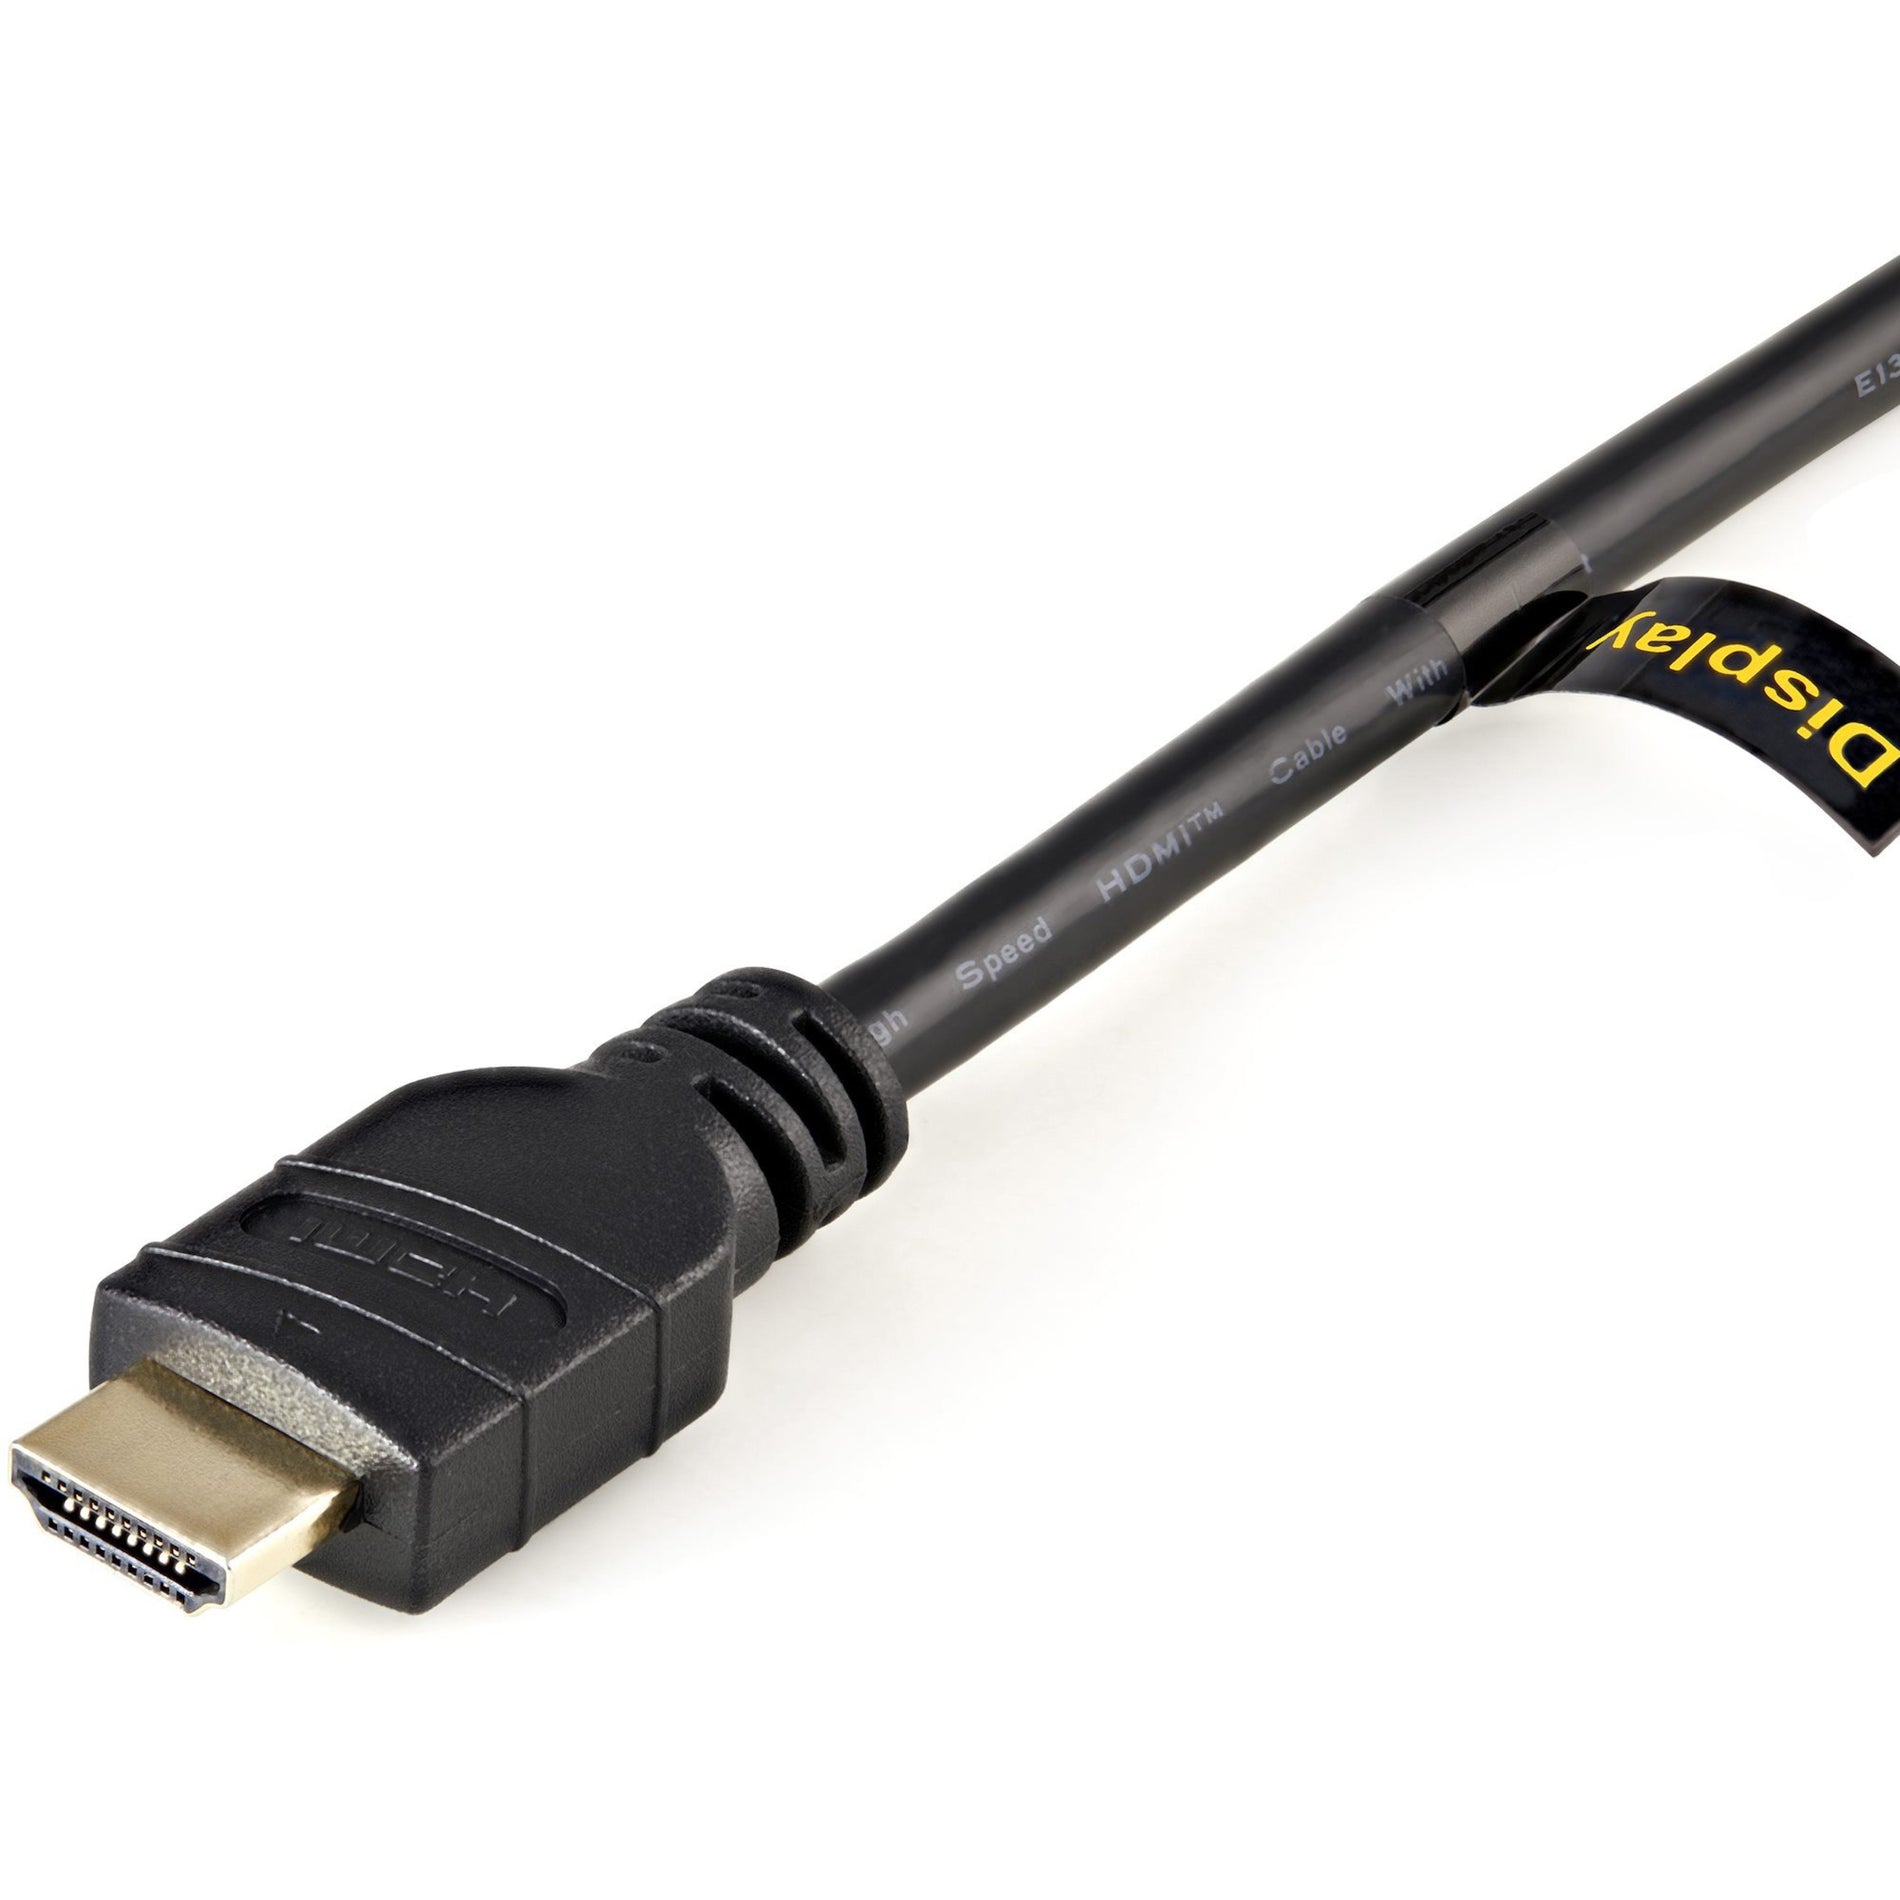 StarTech.com HDMM15MA 15m (50 ft) Active High Speed HDMI Cable - HDMI to HDMI - M/M, Flexible, Signal Booster, 1920 x 1080 Supported Resolution